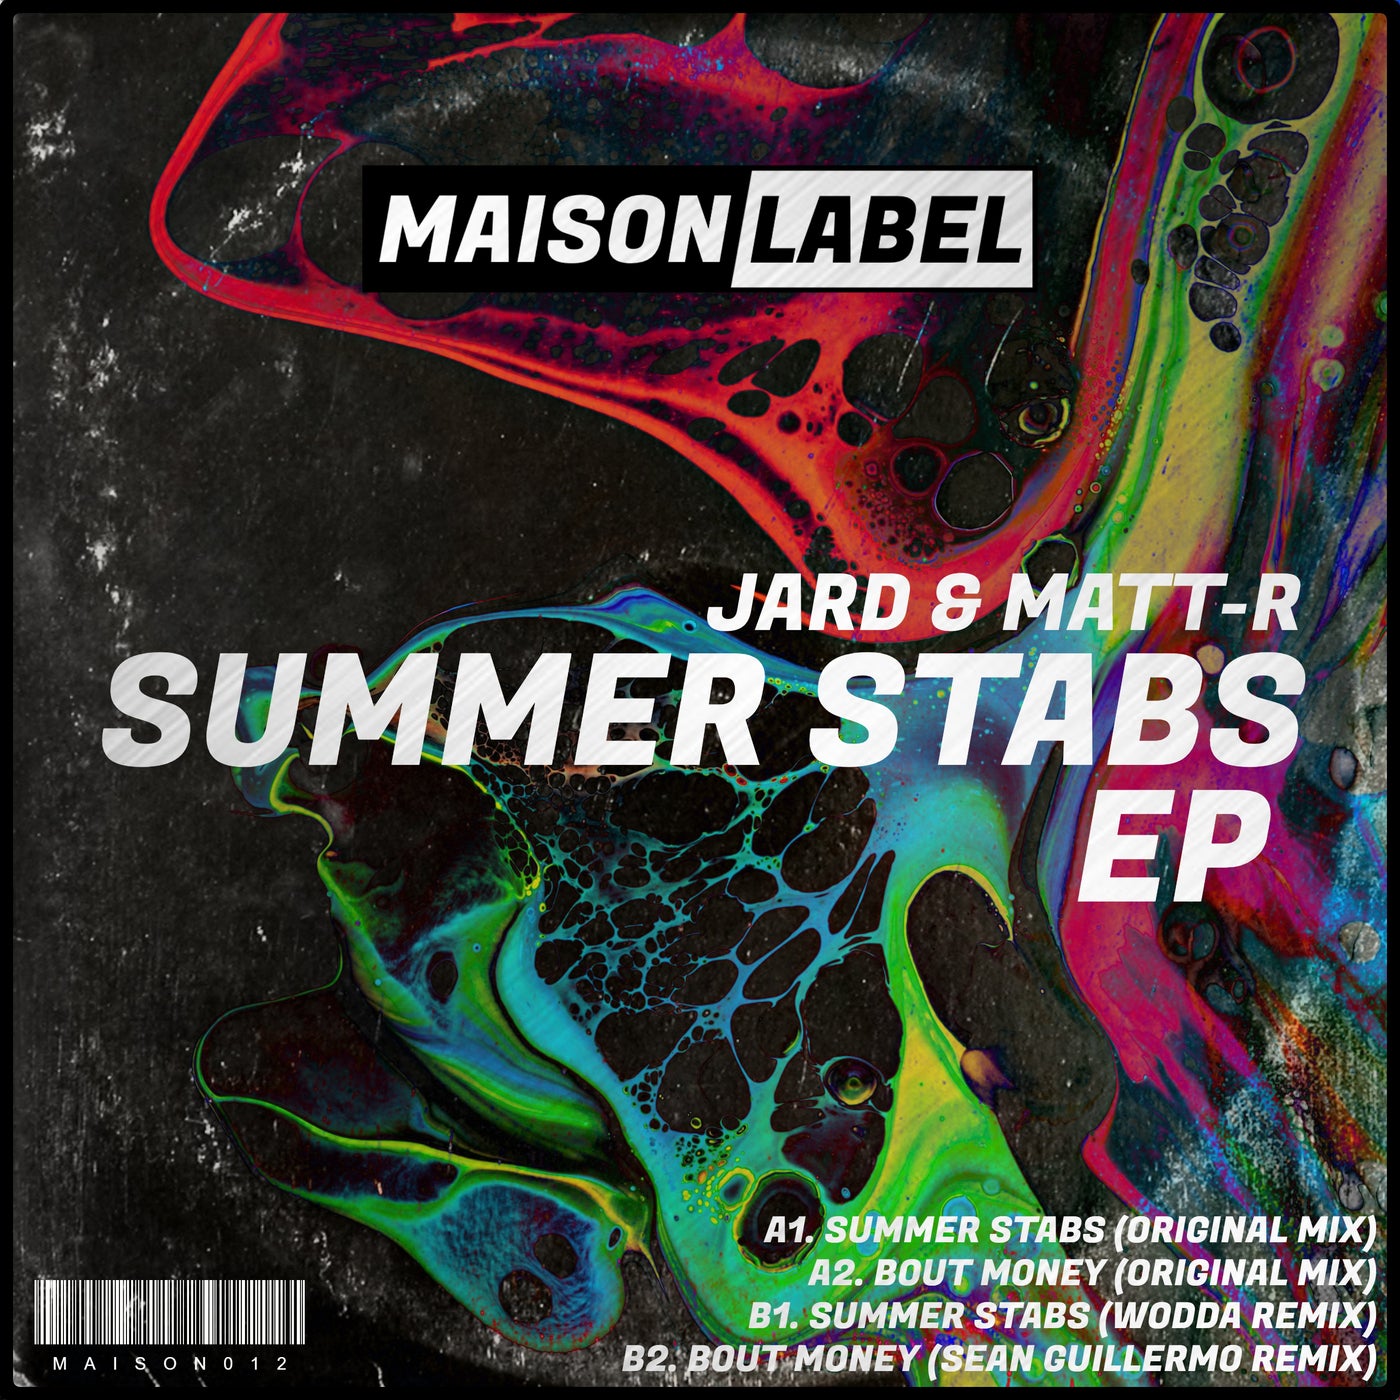 Summer Stabs EP